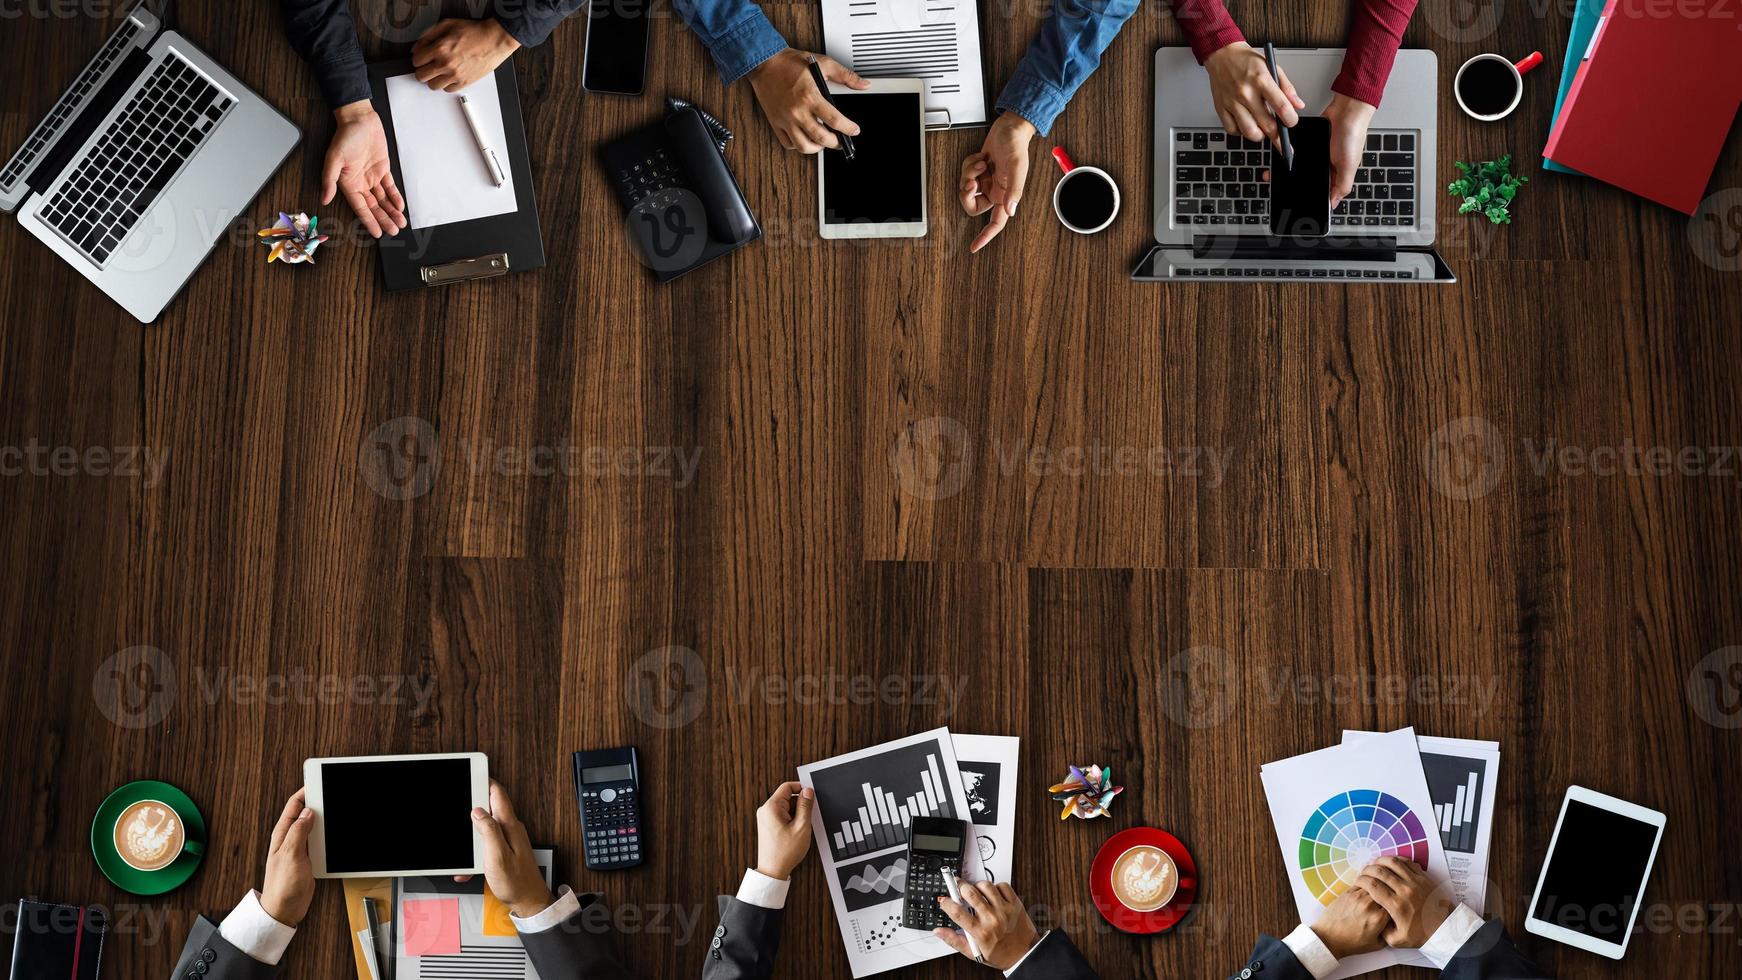 Group Young Coworkers Making Great Business Decisions.Creative Team Discussion Corporate Work Concept Modern Office.Startup Marketing Idea Presentation.Top View.Vertical photo